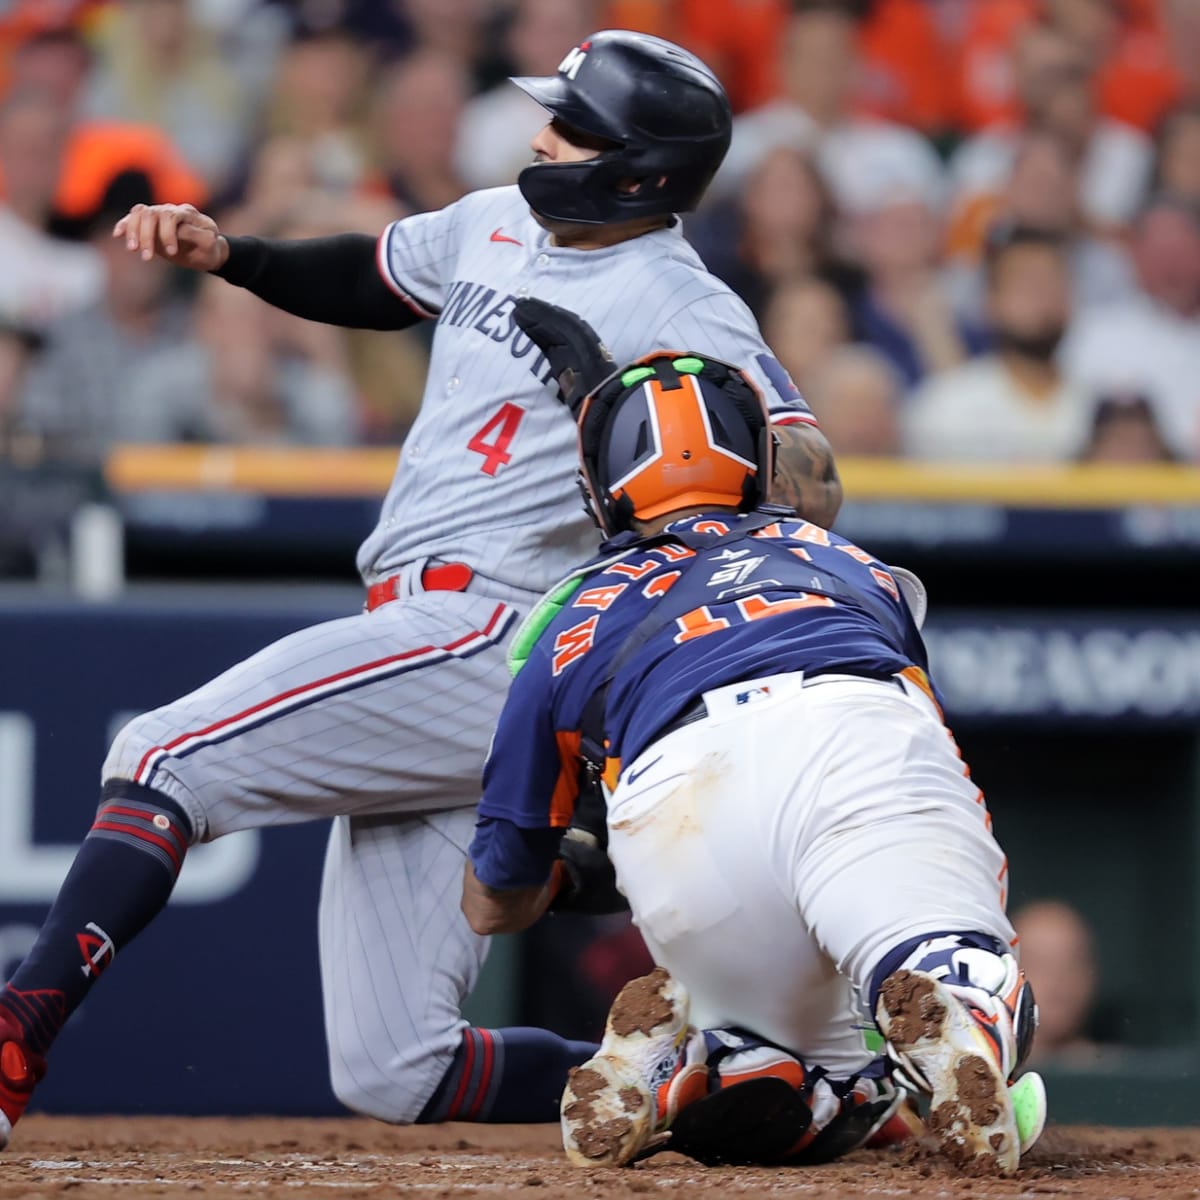 Carlos Correa Moving Up Multiple All-Time Lists with Game 2 RBI